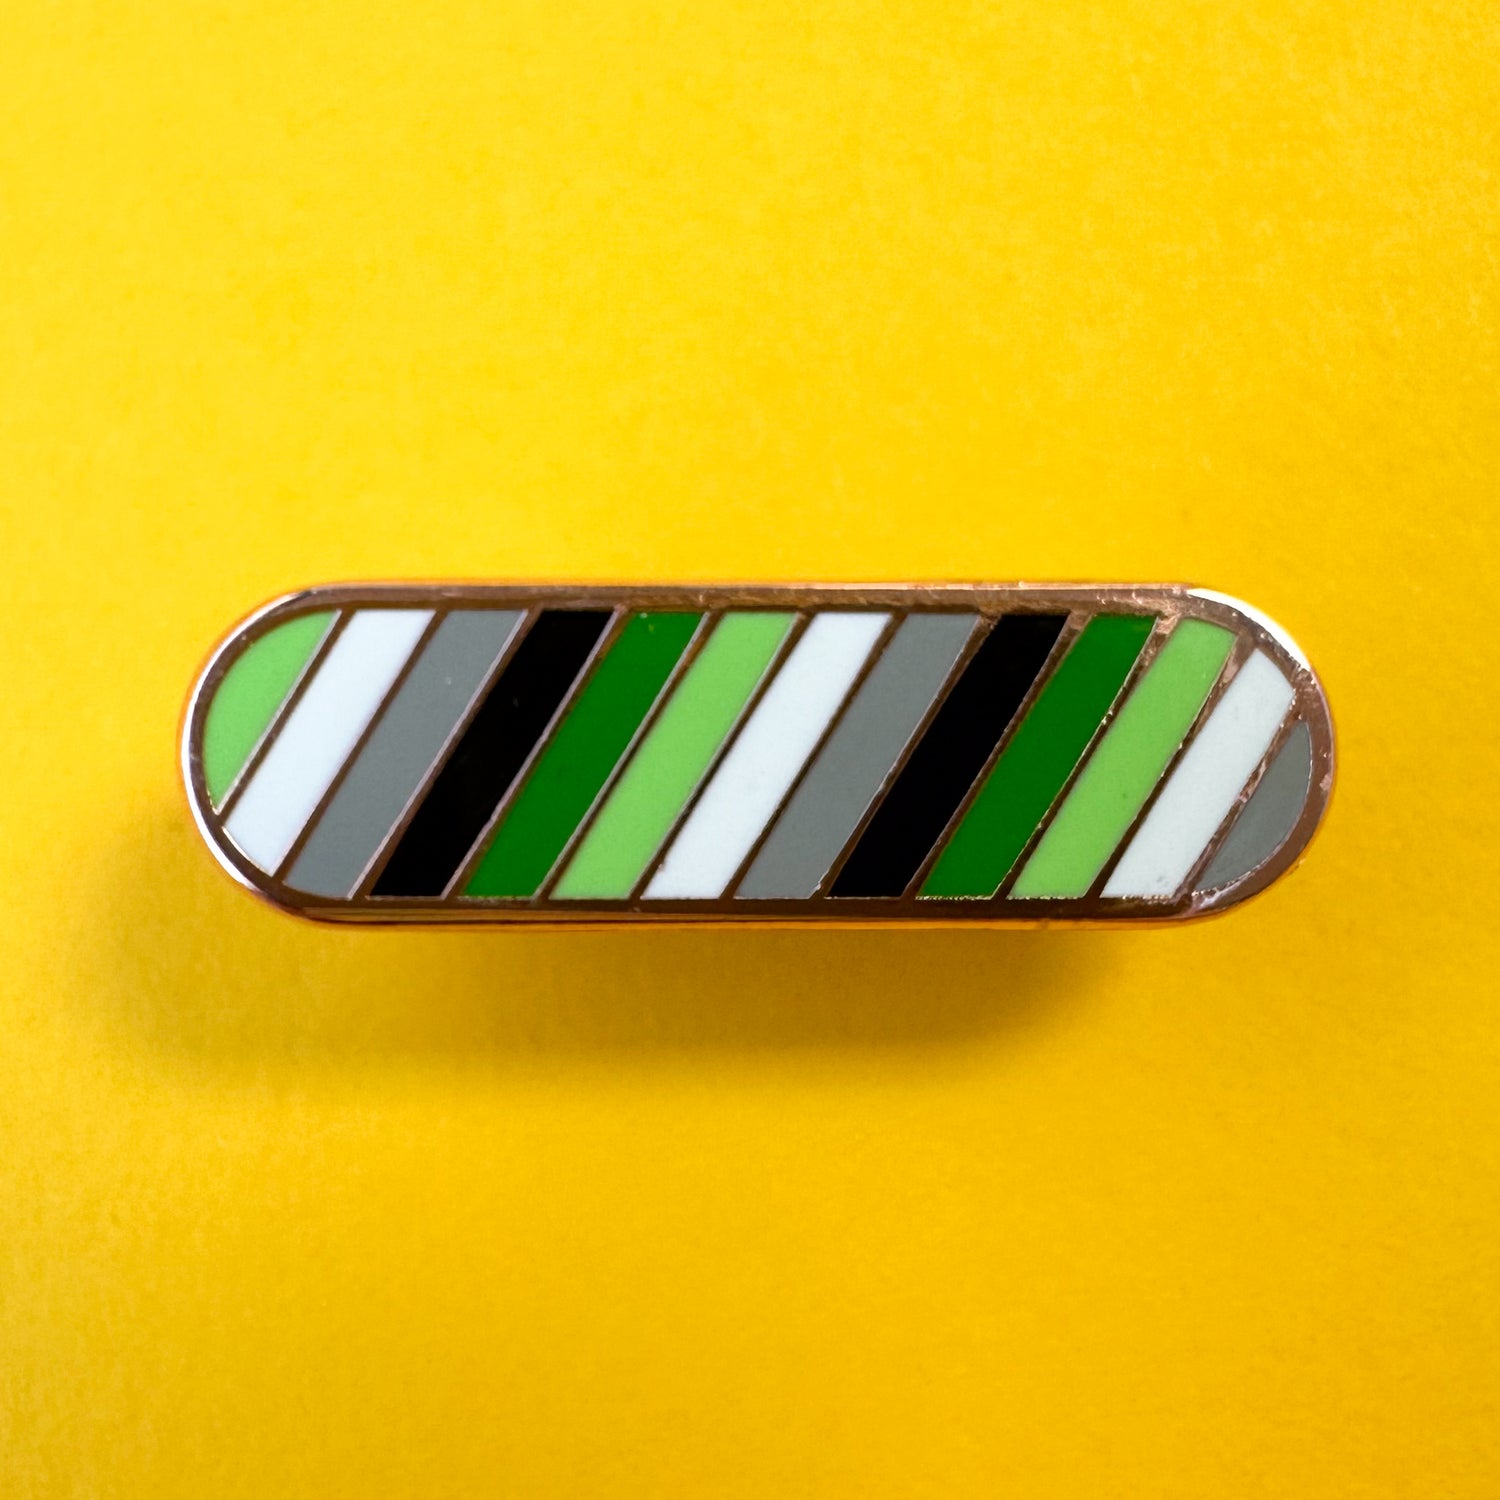 A bandaid shaped pin with diagonal bands of color in the colors of the Aromantic Pride Flag, green, light green, white, grey and black. The pin is on a yellow background.